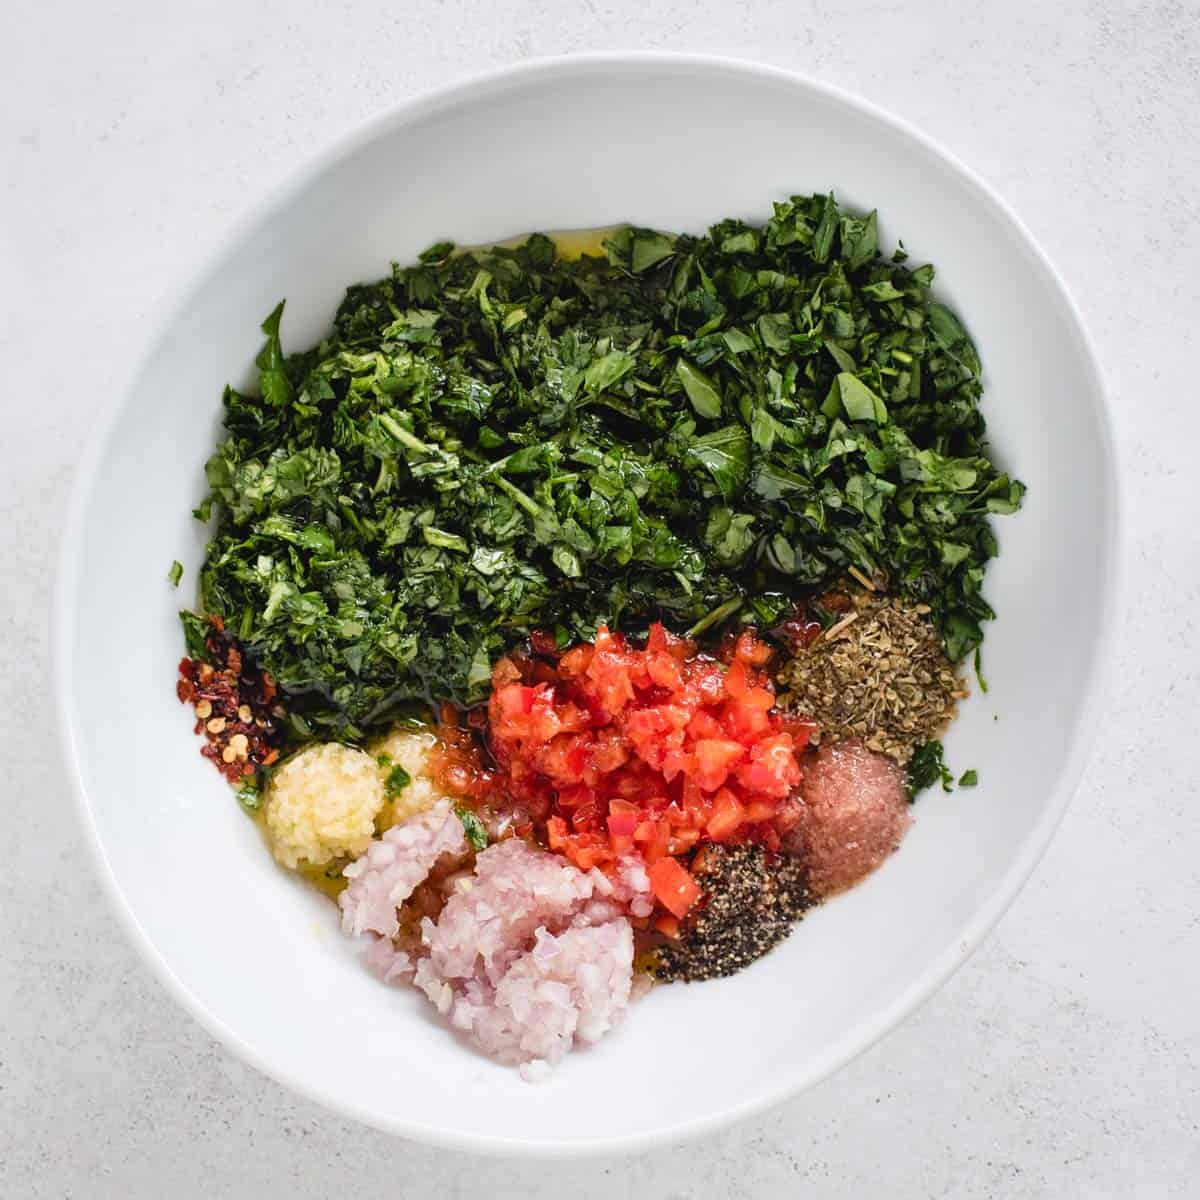 Fresh chopped herbs, red pepper, and other ingredients in a white bowl